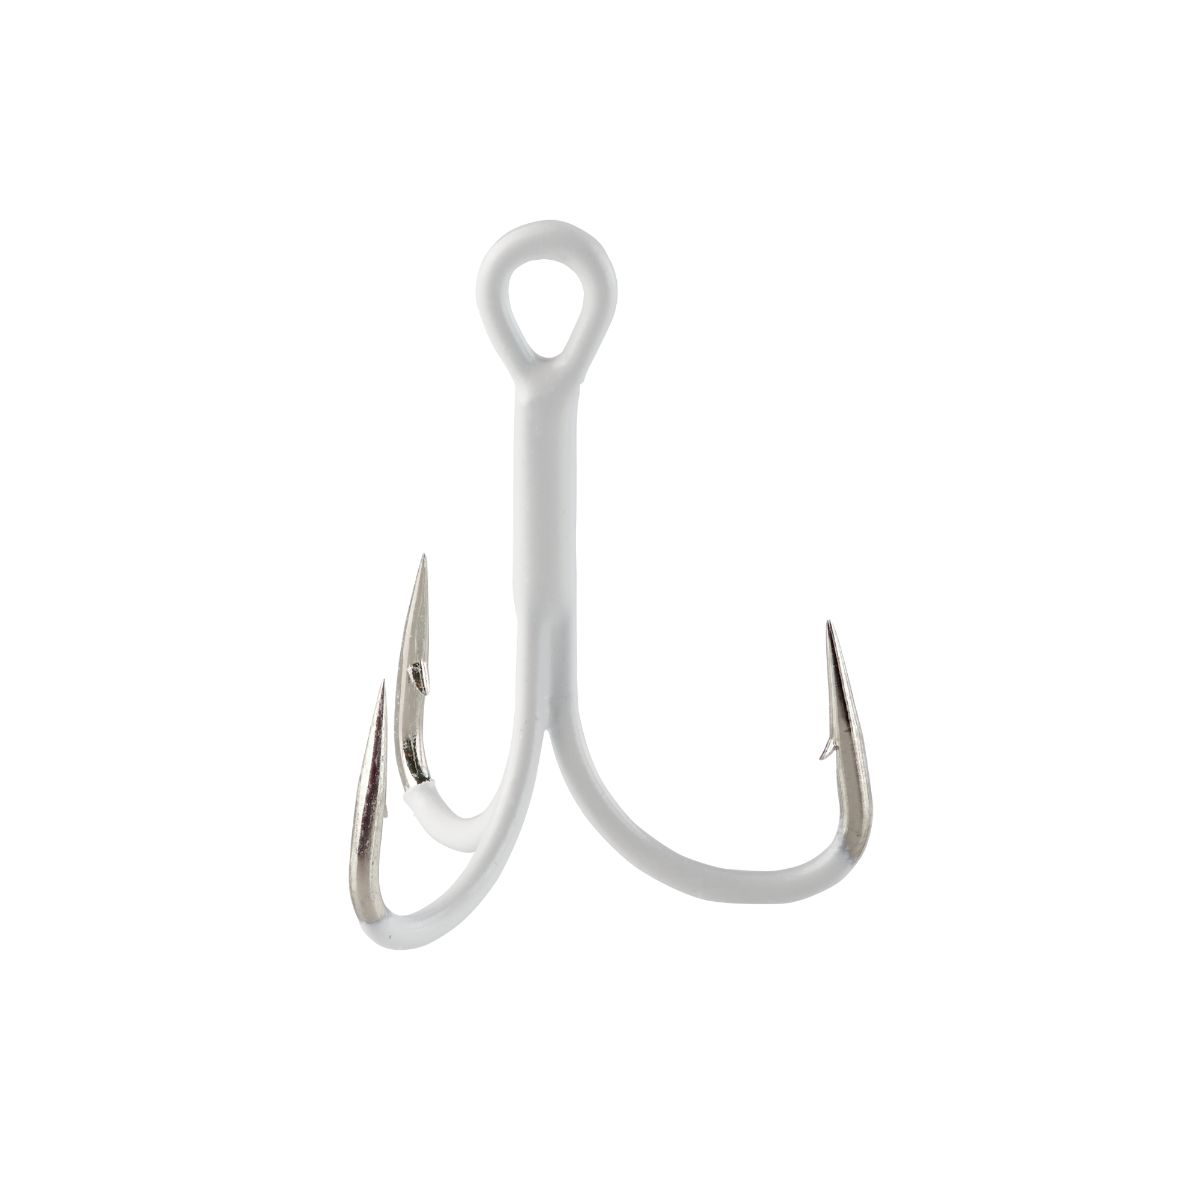 Berkley Expands Fusion19 Line of Hooks – Anglers Channel